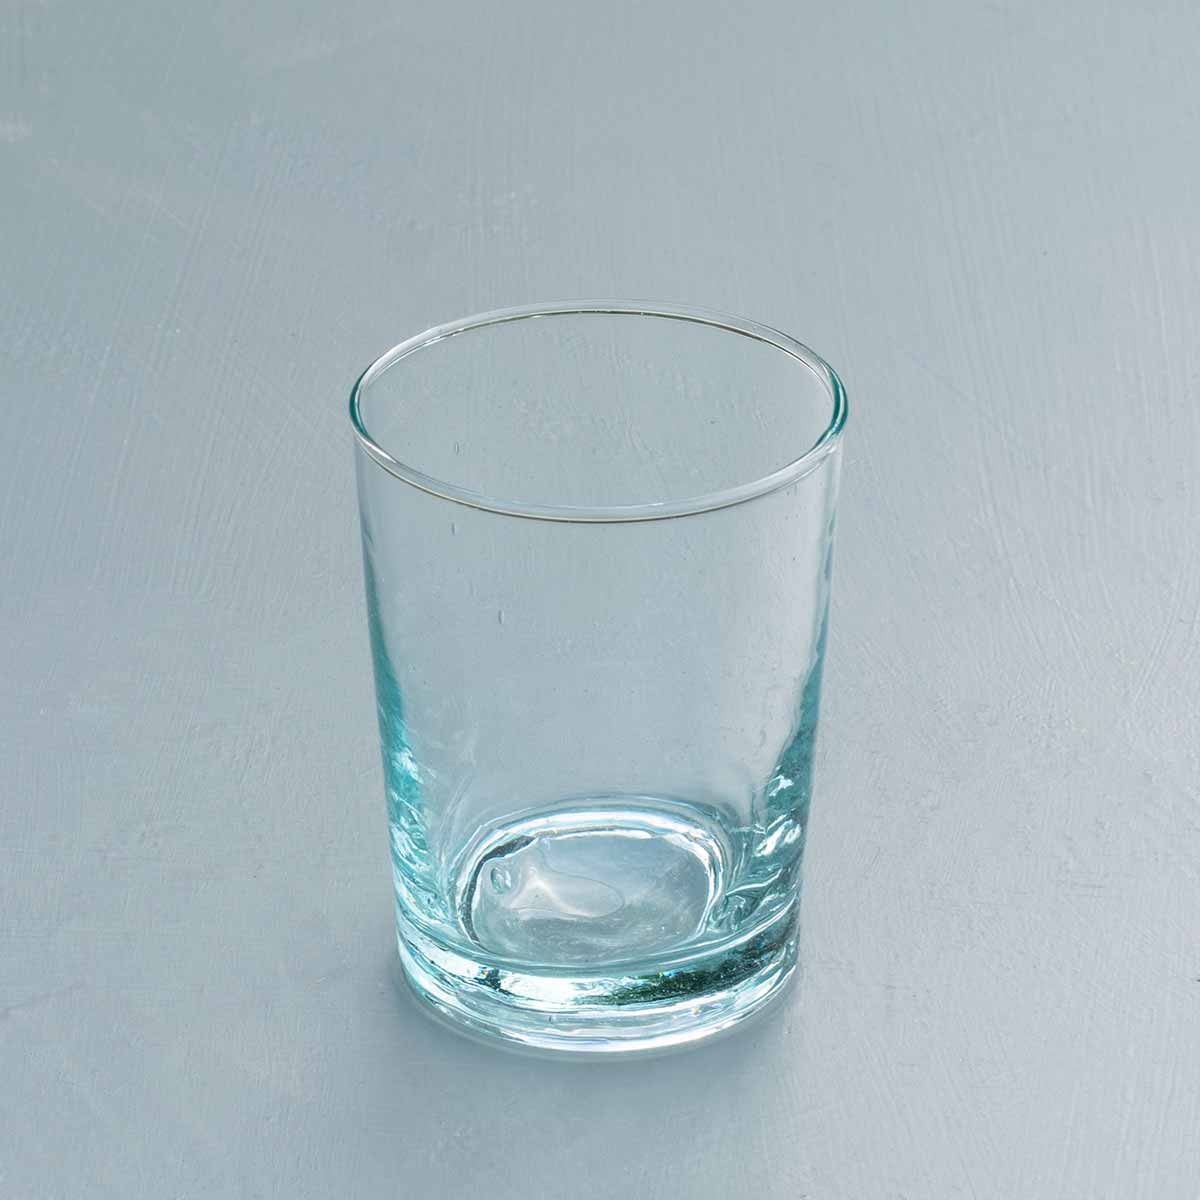 6 Clear Recycled Glass Tumblers